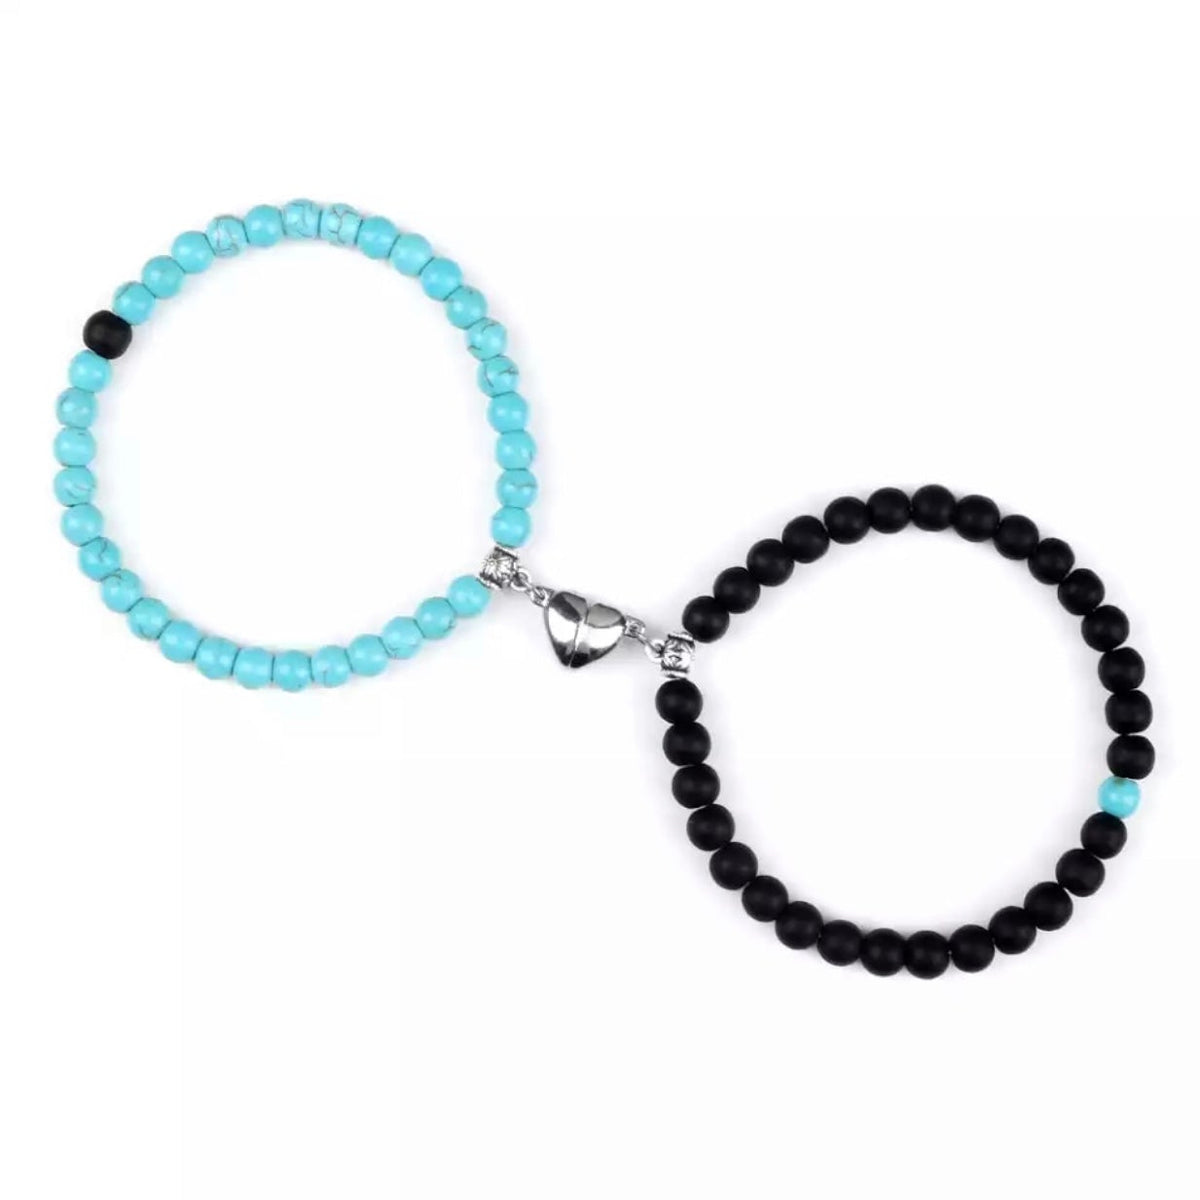 Couples Magnetic Bracelet Set Jewelry - Turquoise and Black 